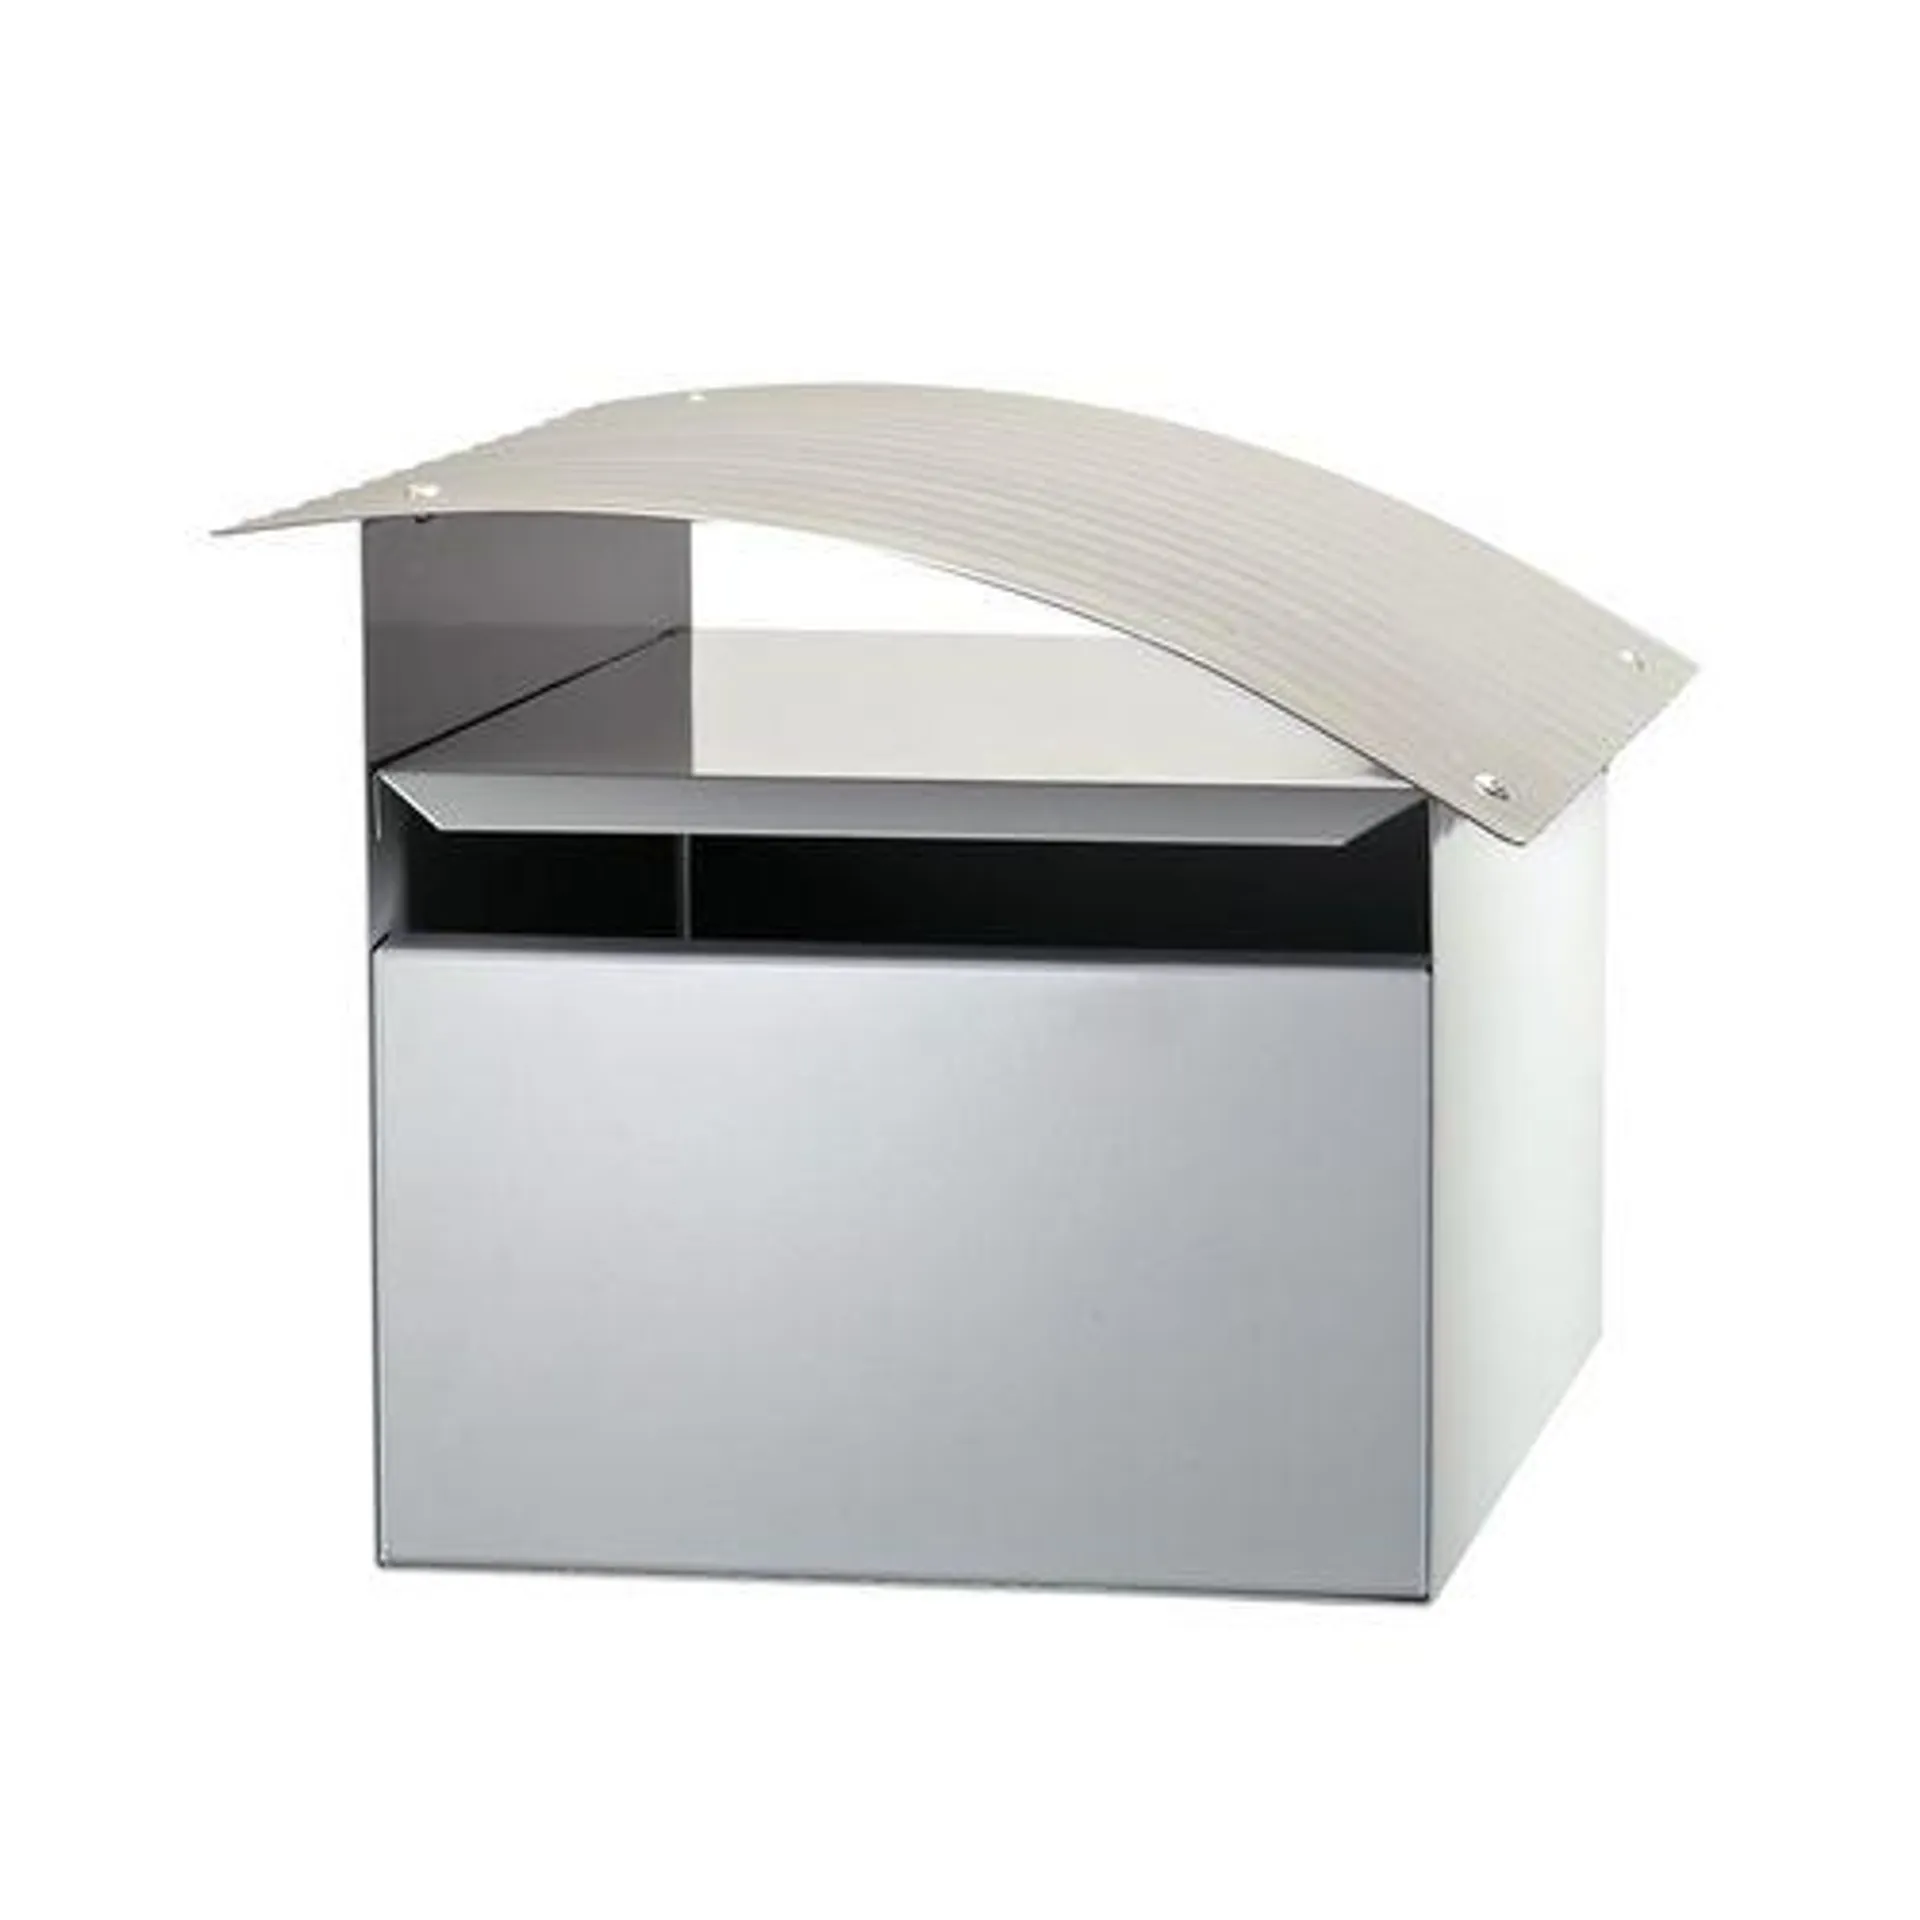 Sandleford 210 x 180 x 290mm White And Silver Ripple Galvanised Letterbox